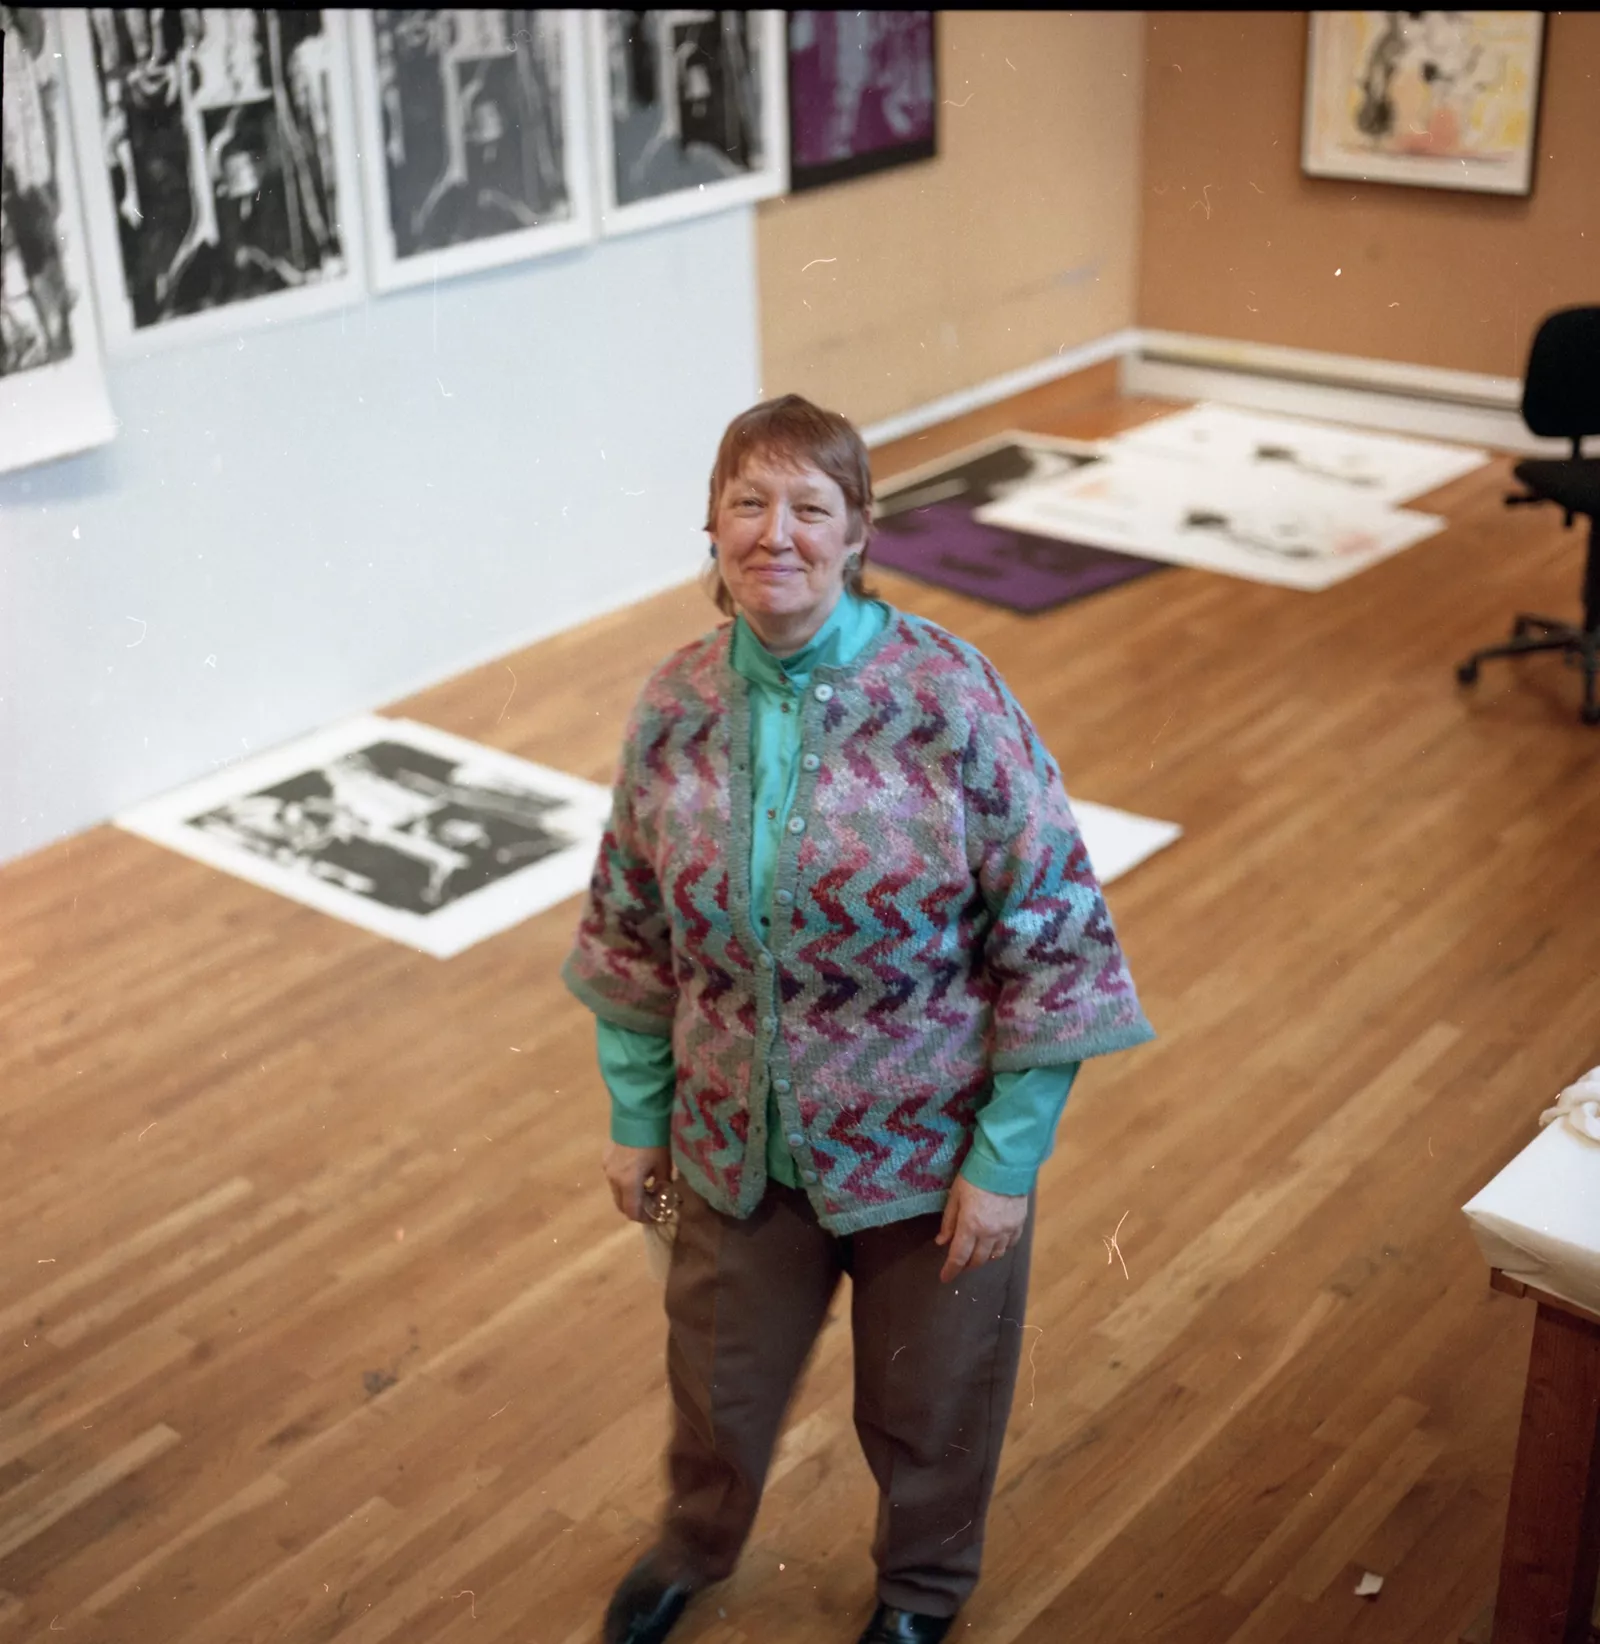 Colour photo of Pat Gilmour in an art studio